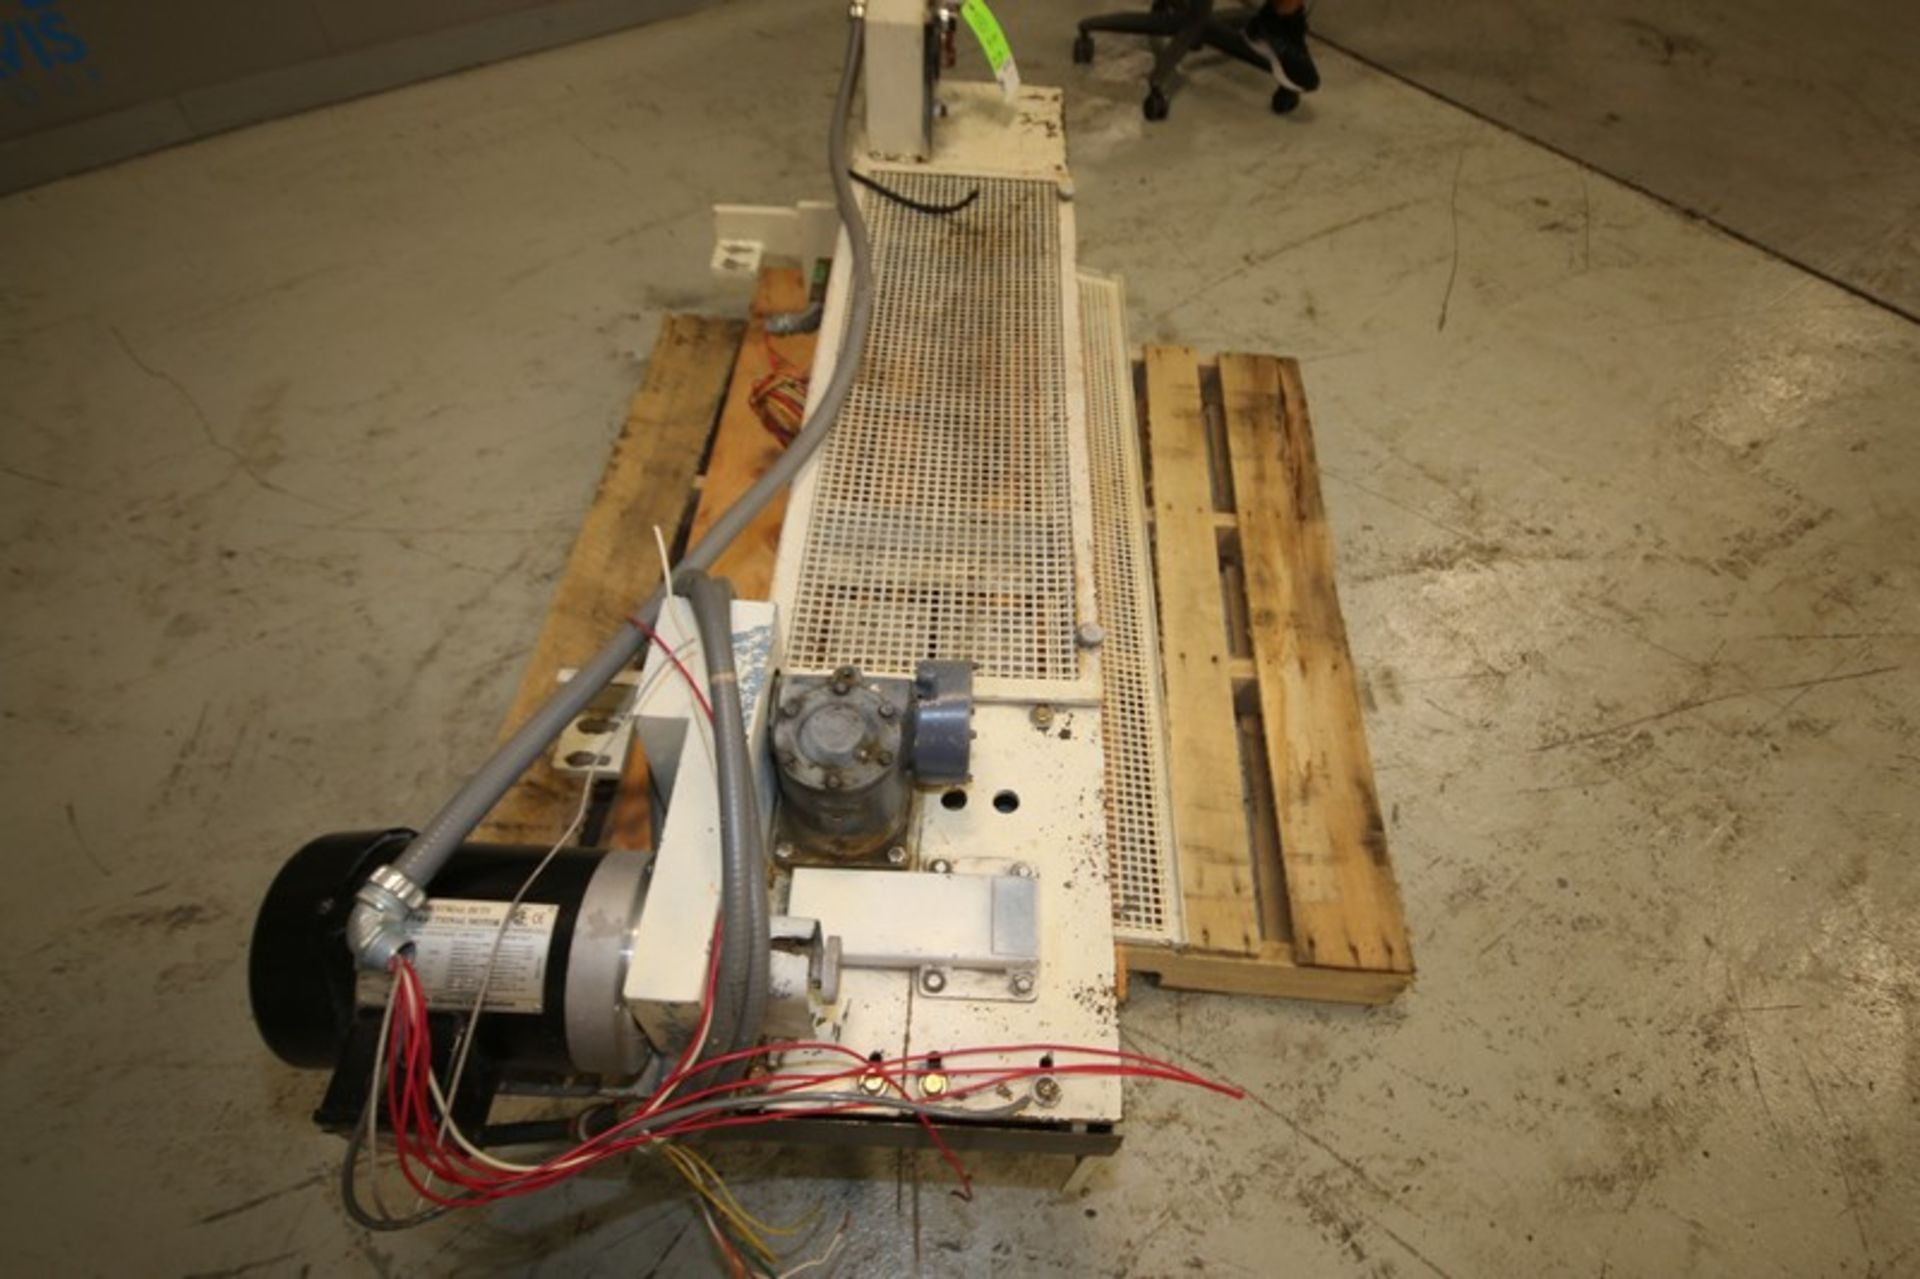 6' L Heat Bag Sealer with 3/4 hp/1725 rpm 208-230/ 460V (INV#84745)(Located @ the MDG Auction - Image 4 of 5